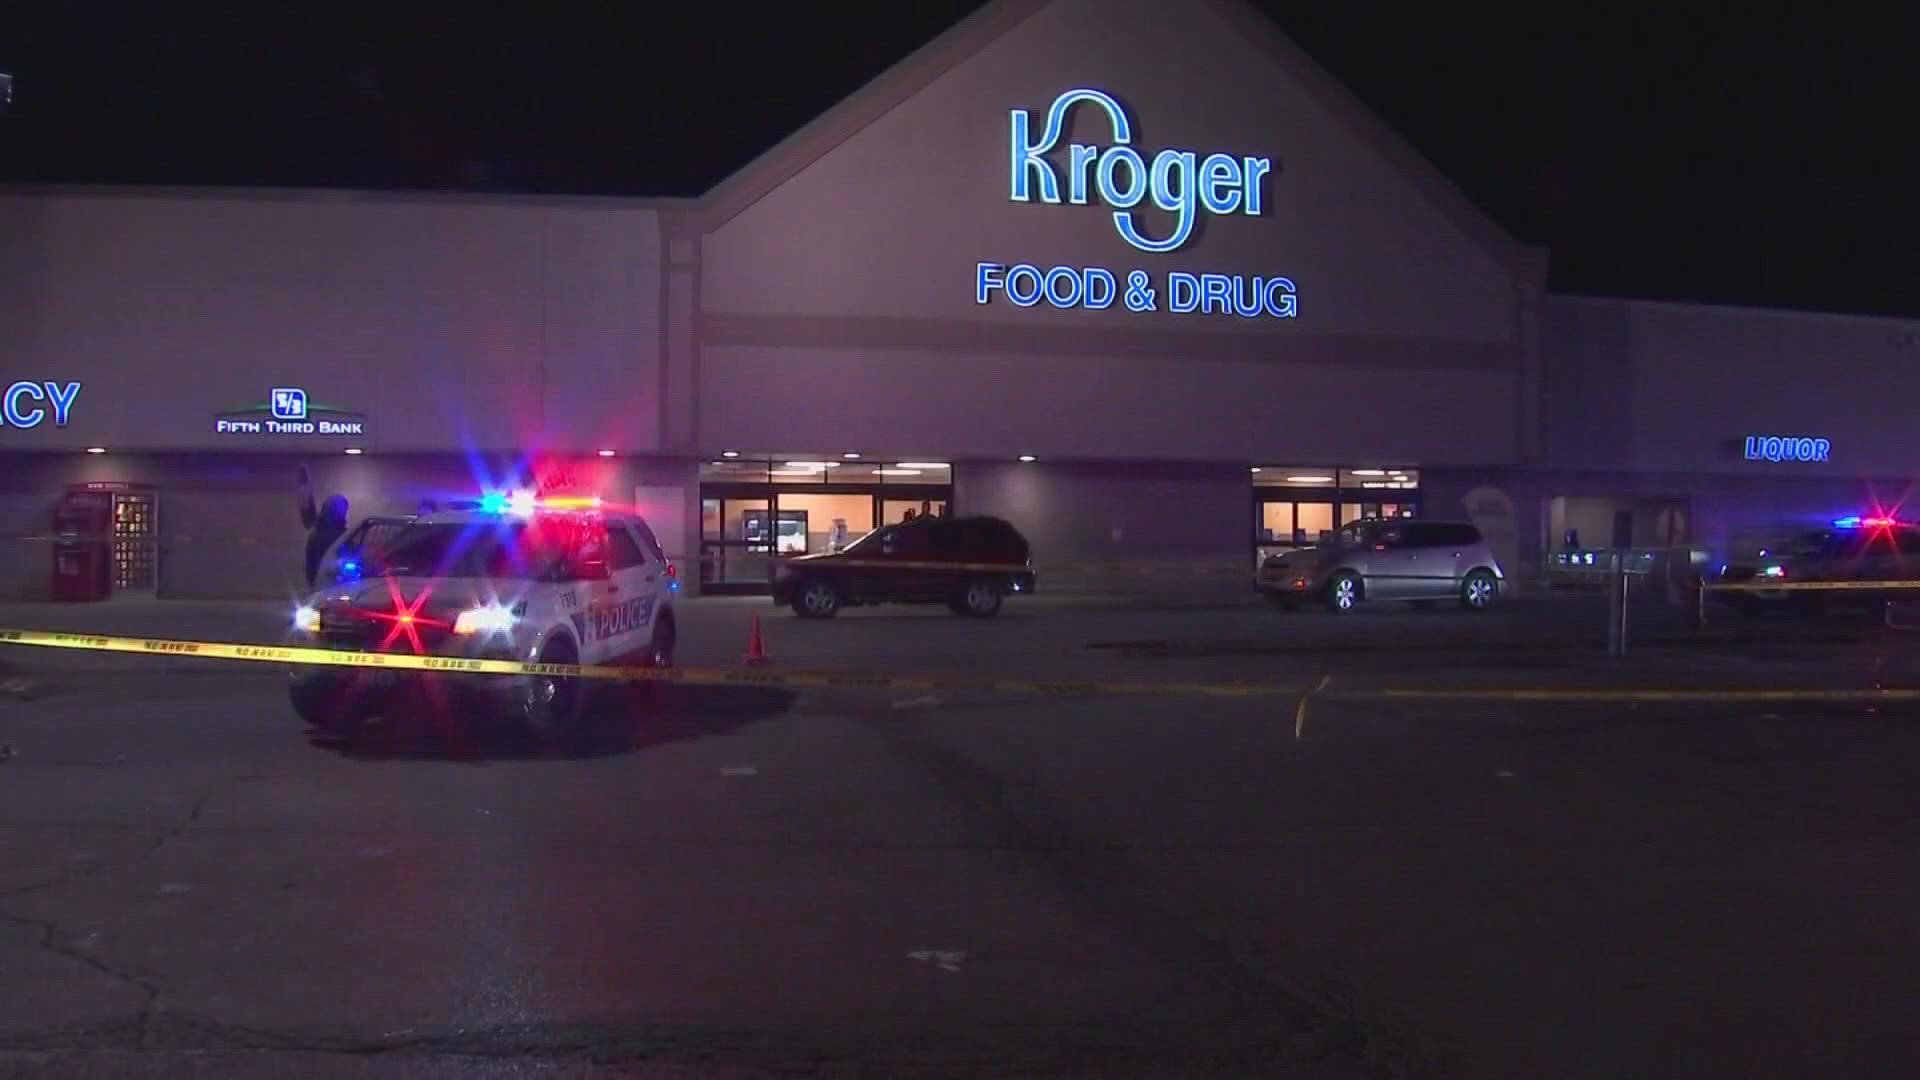 Police said the incident began with an altercation inside the grocery store between a security guard working at the store and a woman, who was a customer.